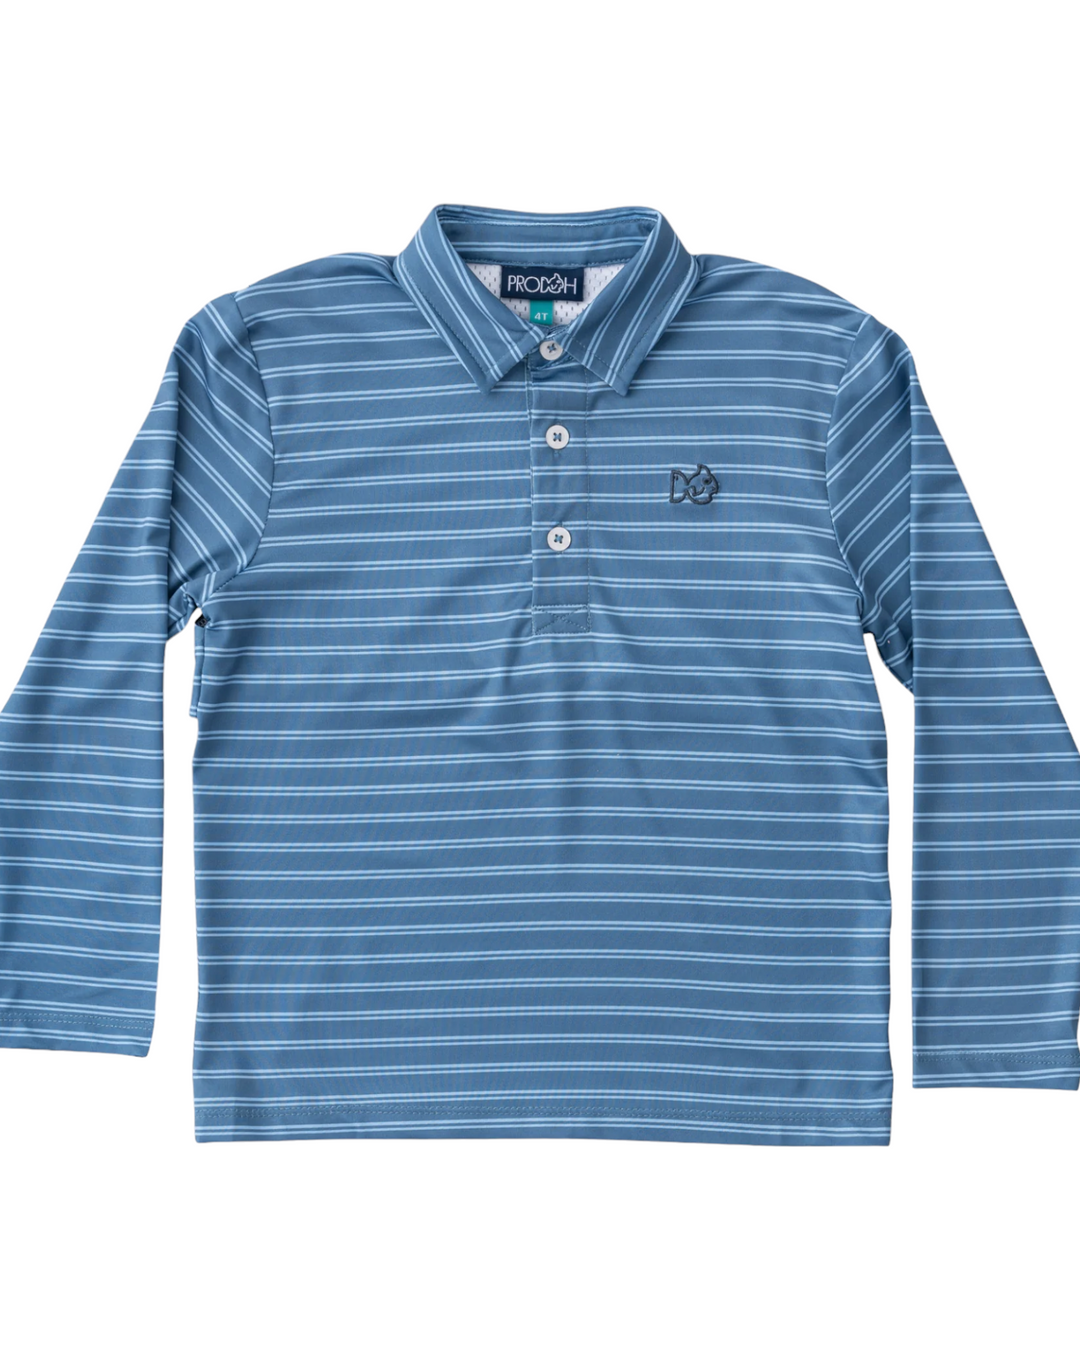 Boys' Long Sleeve Pro Performance Polo: Bluefin and Powder Blue Stripe, front